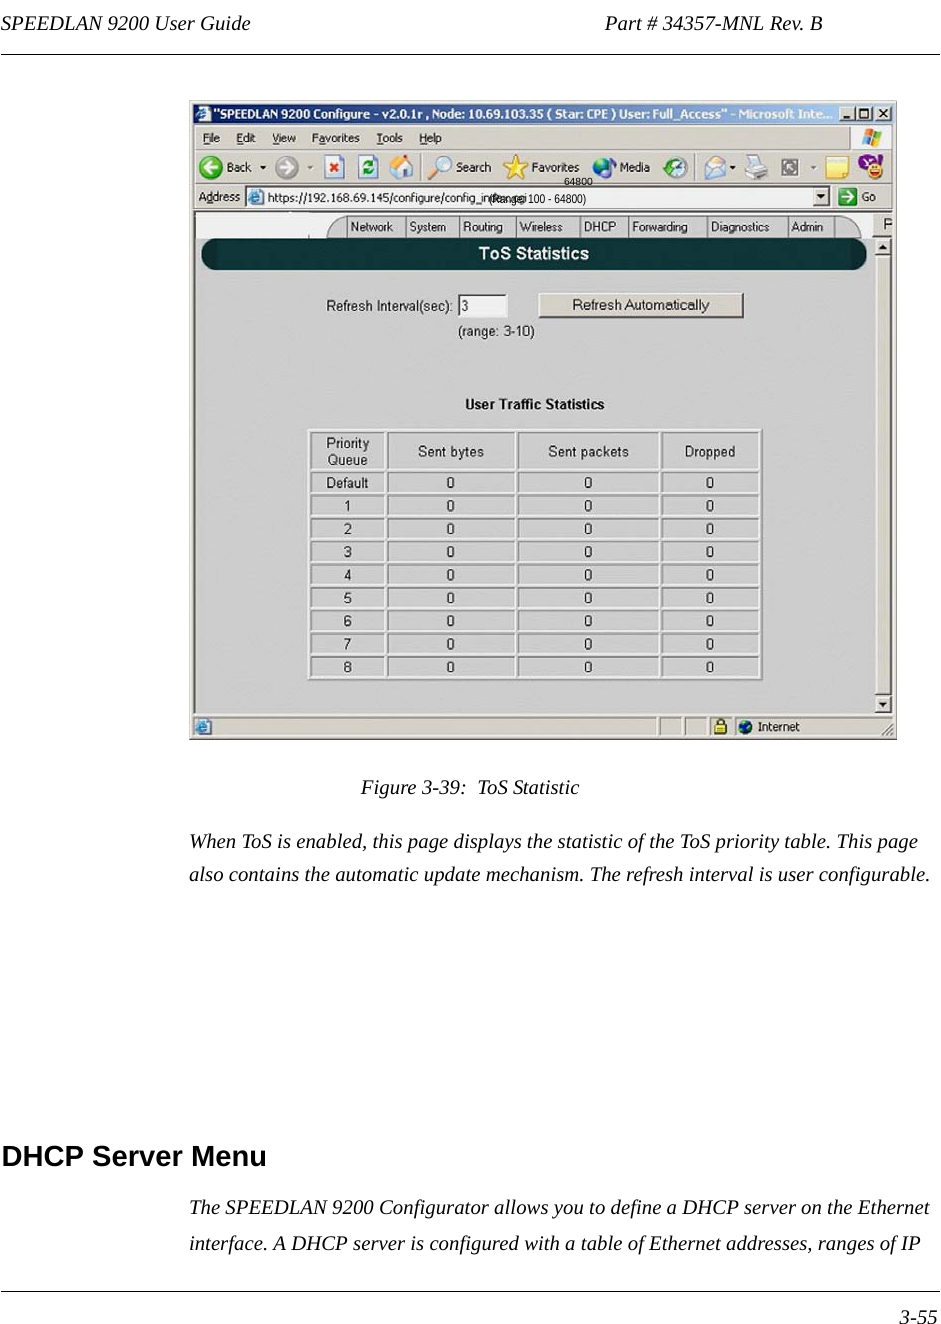 SPEEDLAN 9200 User Guide                                                                    Part # 34357-MNL Rev. B      3-55                                                                                                                                                              Figure 3-39:  ToS StatisticWhen ToS is enabled, this page displays the statistic of the ToS priority table. This page also contains the automatic update mechanism. The refresh interval is user configurable.DHCP Server MenuThe SPEEDLAN 9200 Configurator allows you to define a DHCP server on the Ethernet interface. A DHCP server is configured with a table of Ethernet addresses, ranges of IP 64800(Range: 100 - 64800)